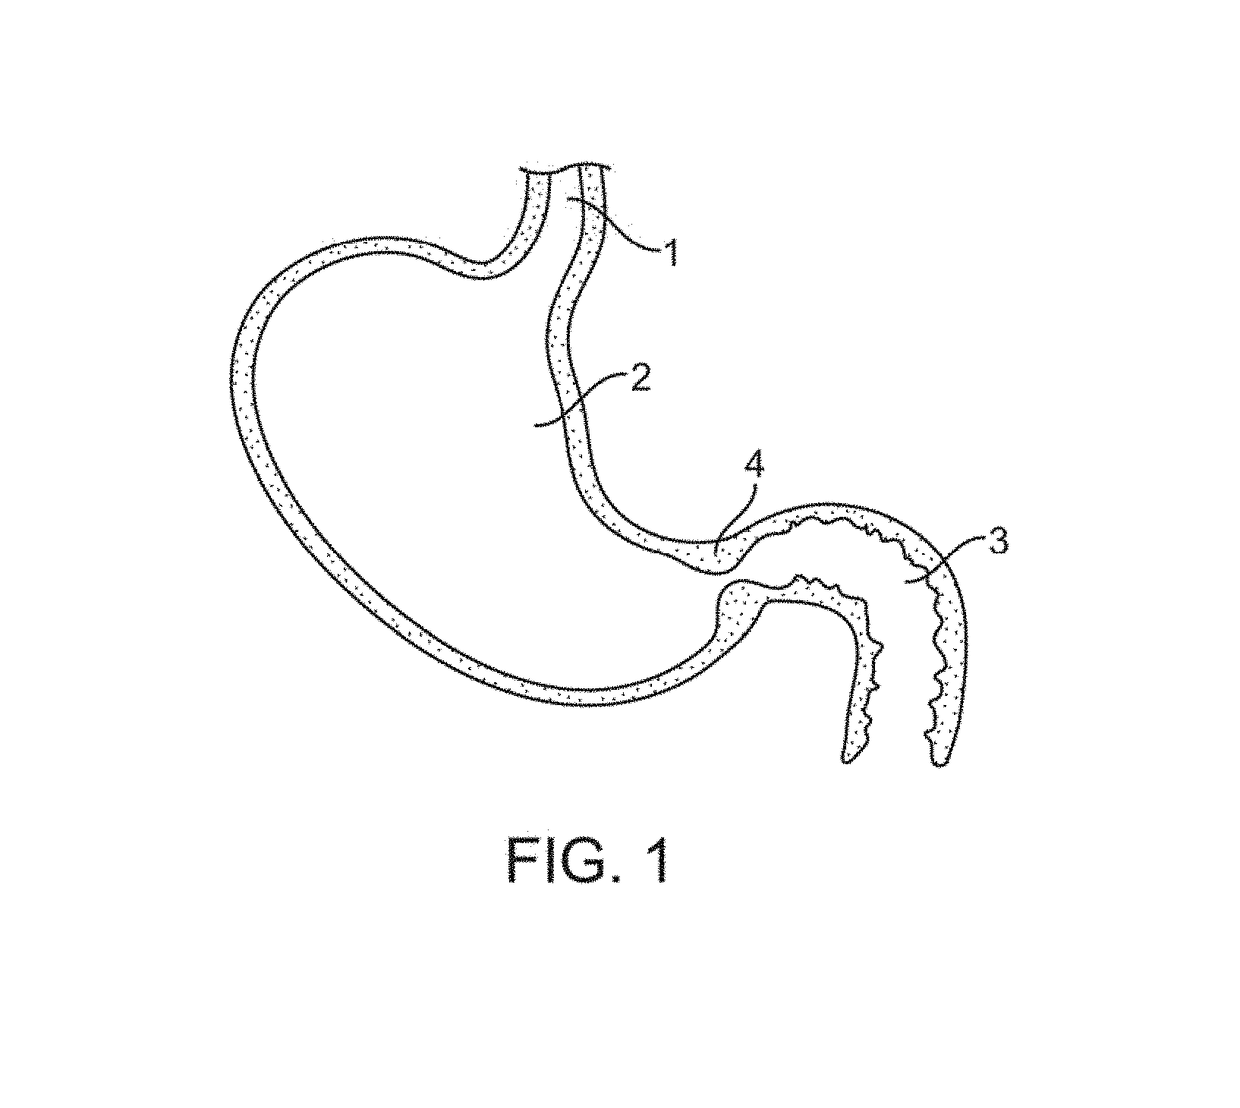 Devices and methods for gastrointestinal stimulation